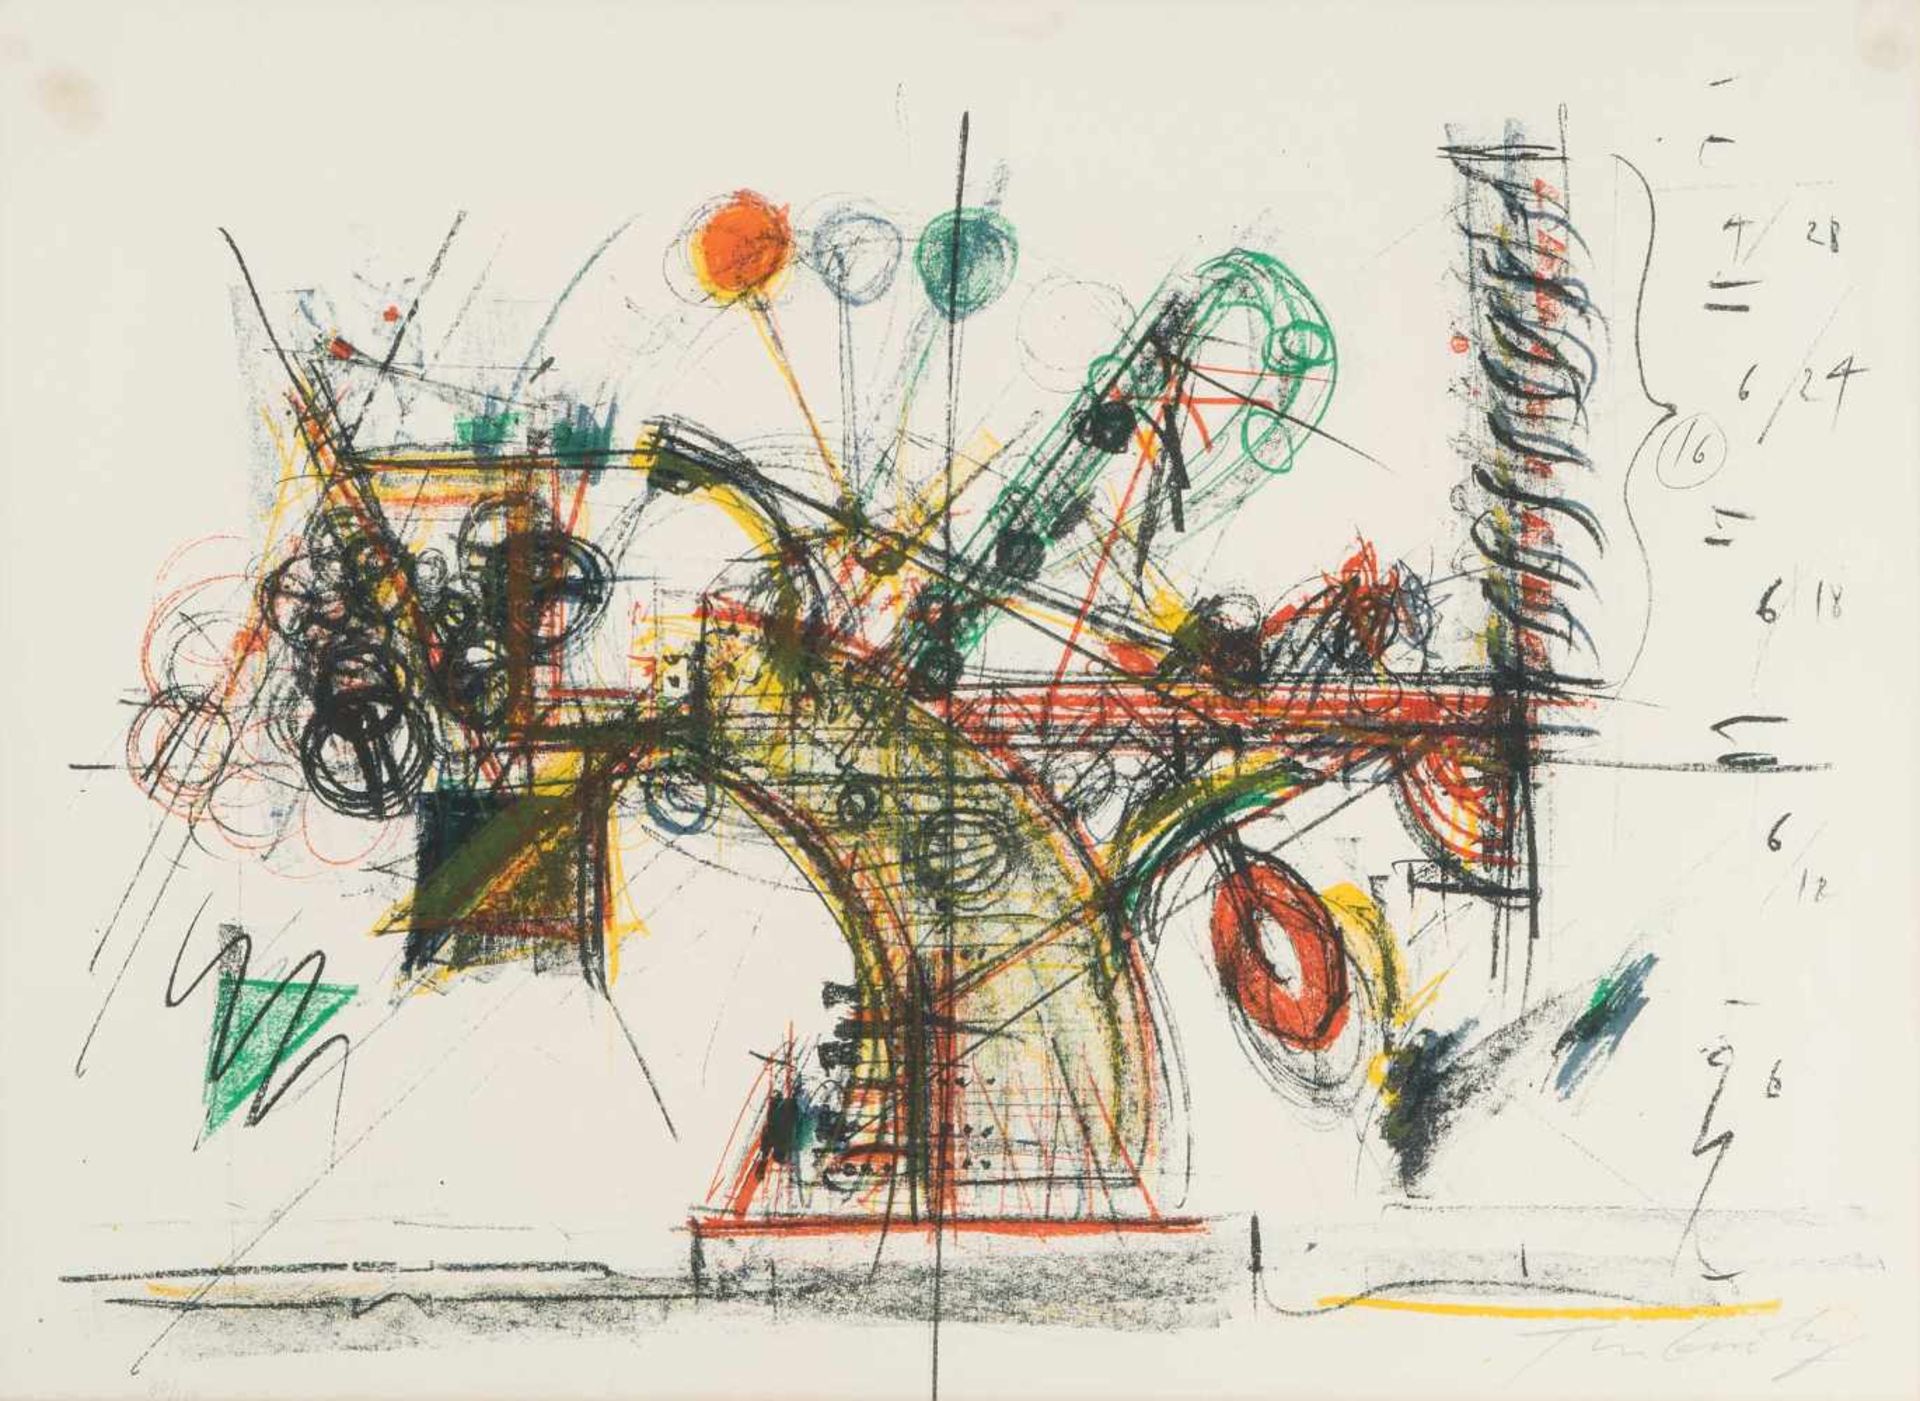 Tinguely, Jean(Fribourg 1925–1992 Fribourg)"Chaos". 1975. Farblithographie. 80/100. Unten rechts